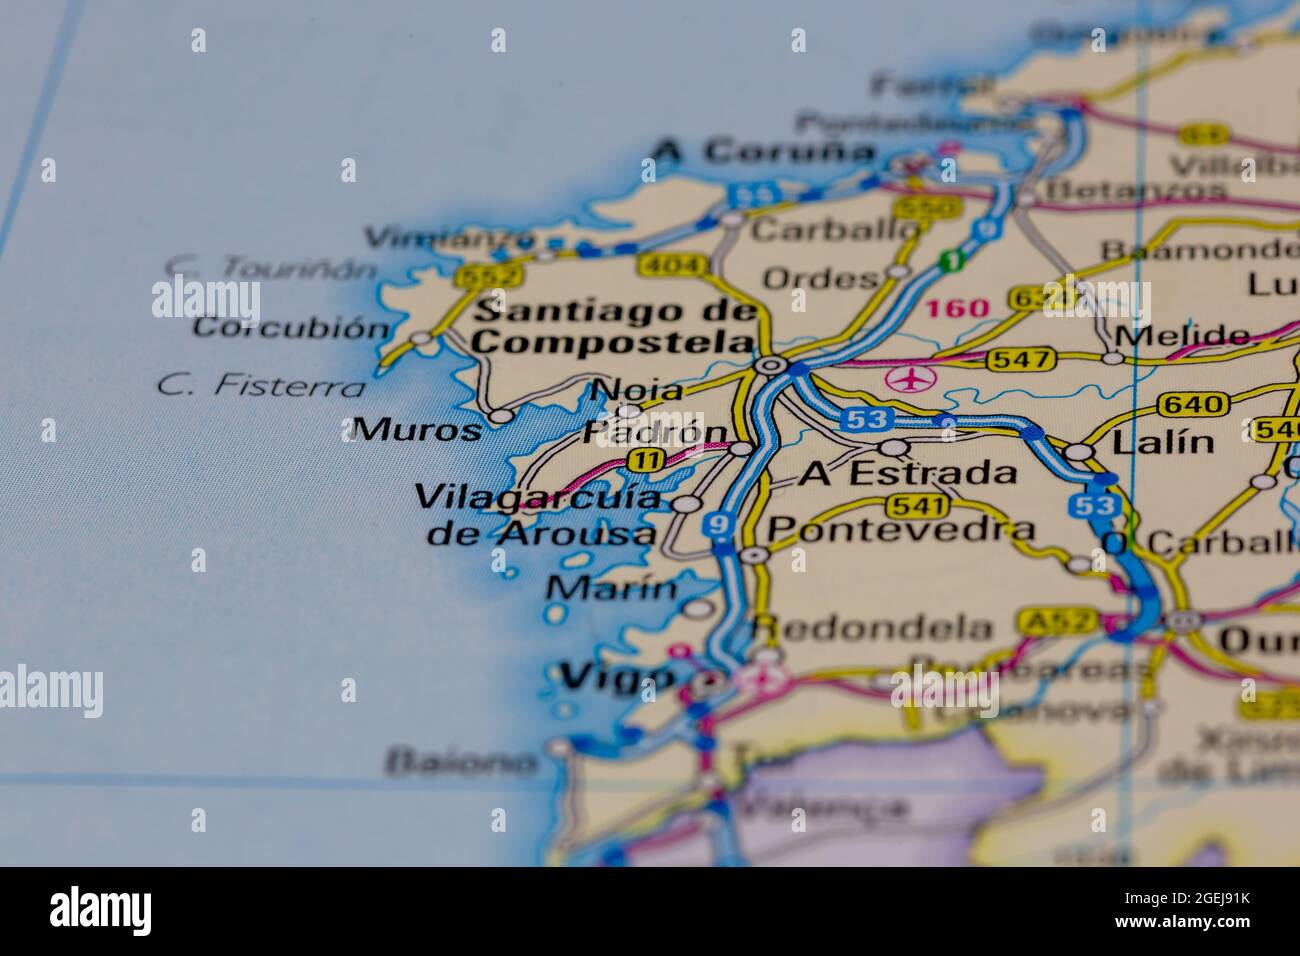 Padron Spain shown on a road map or Geography map Stock Photo